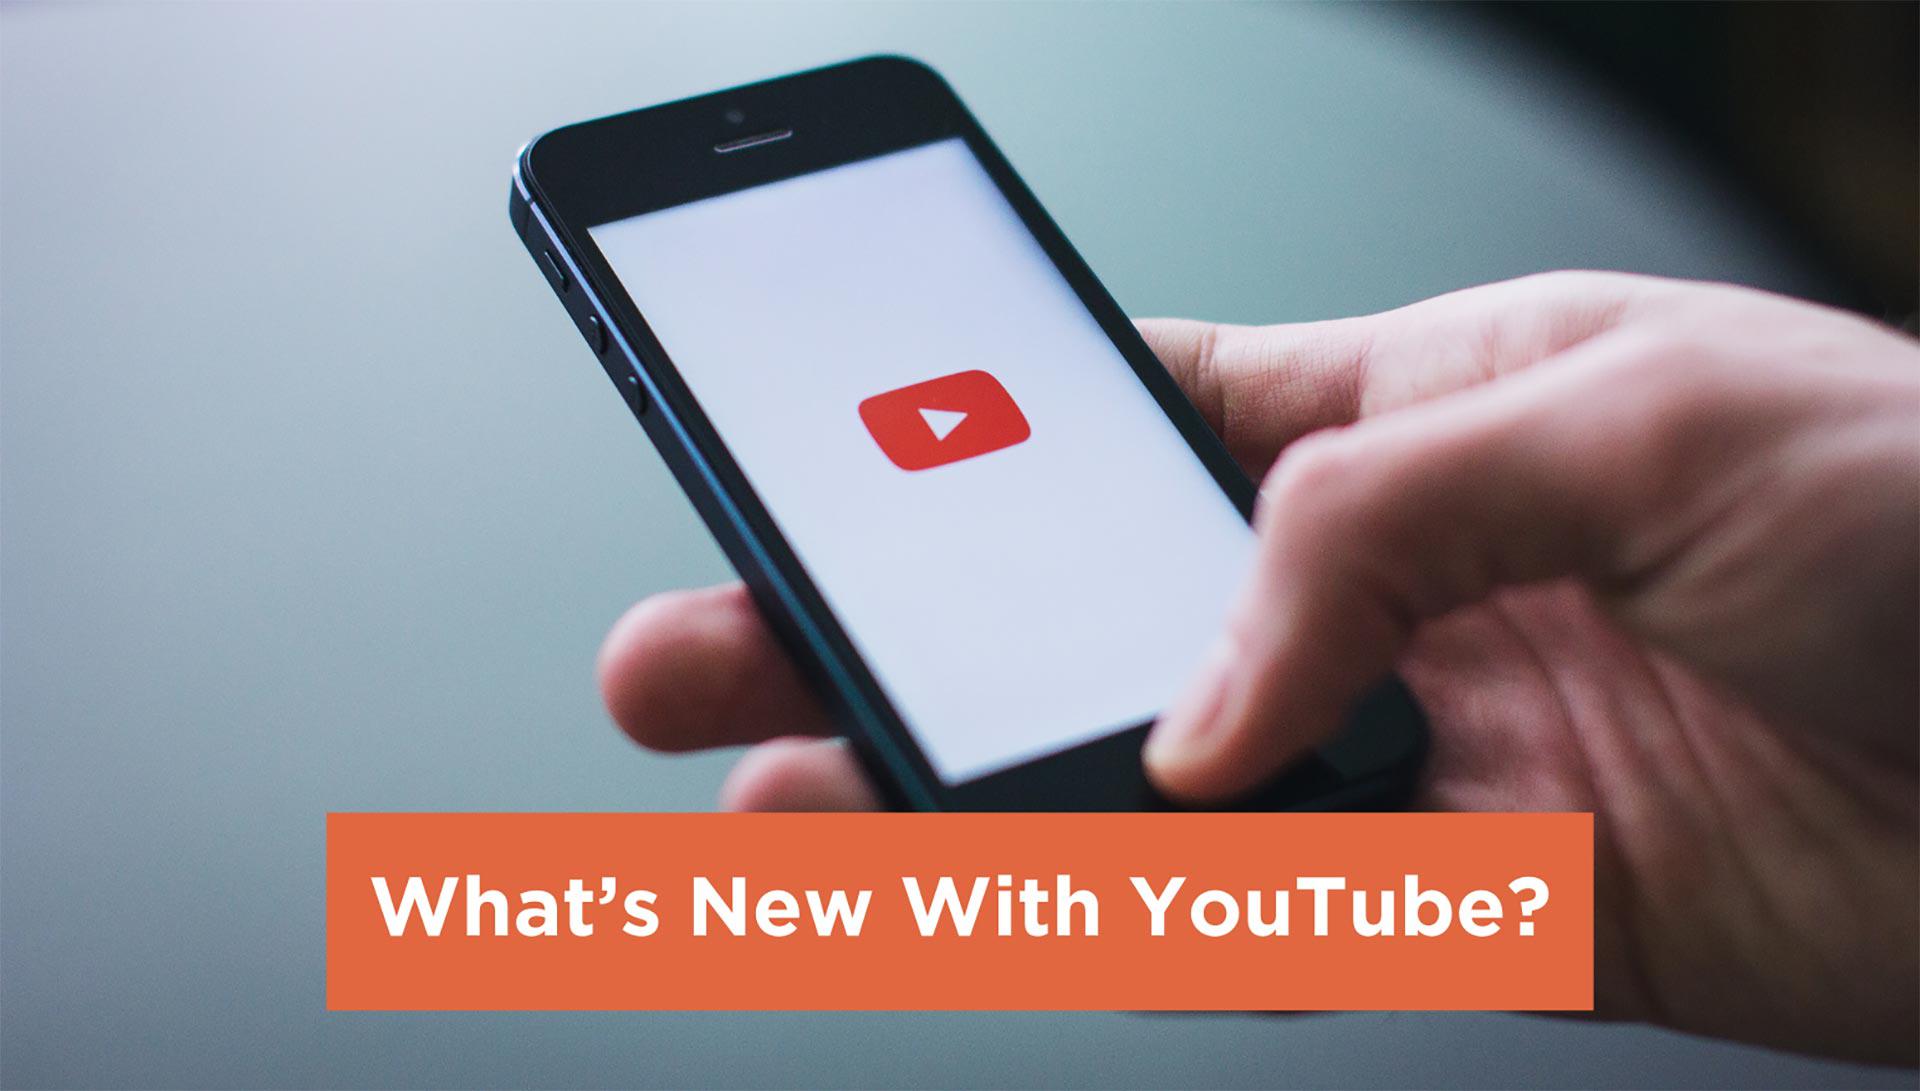 What's new with YouTube?